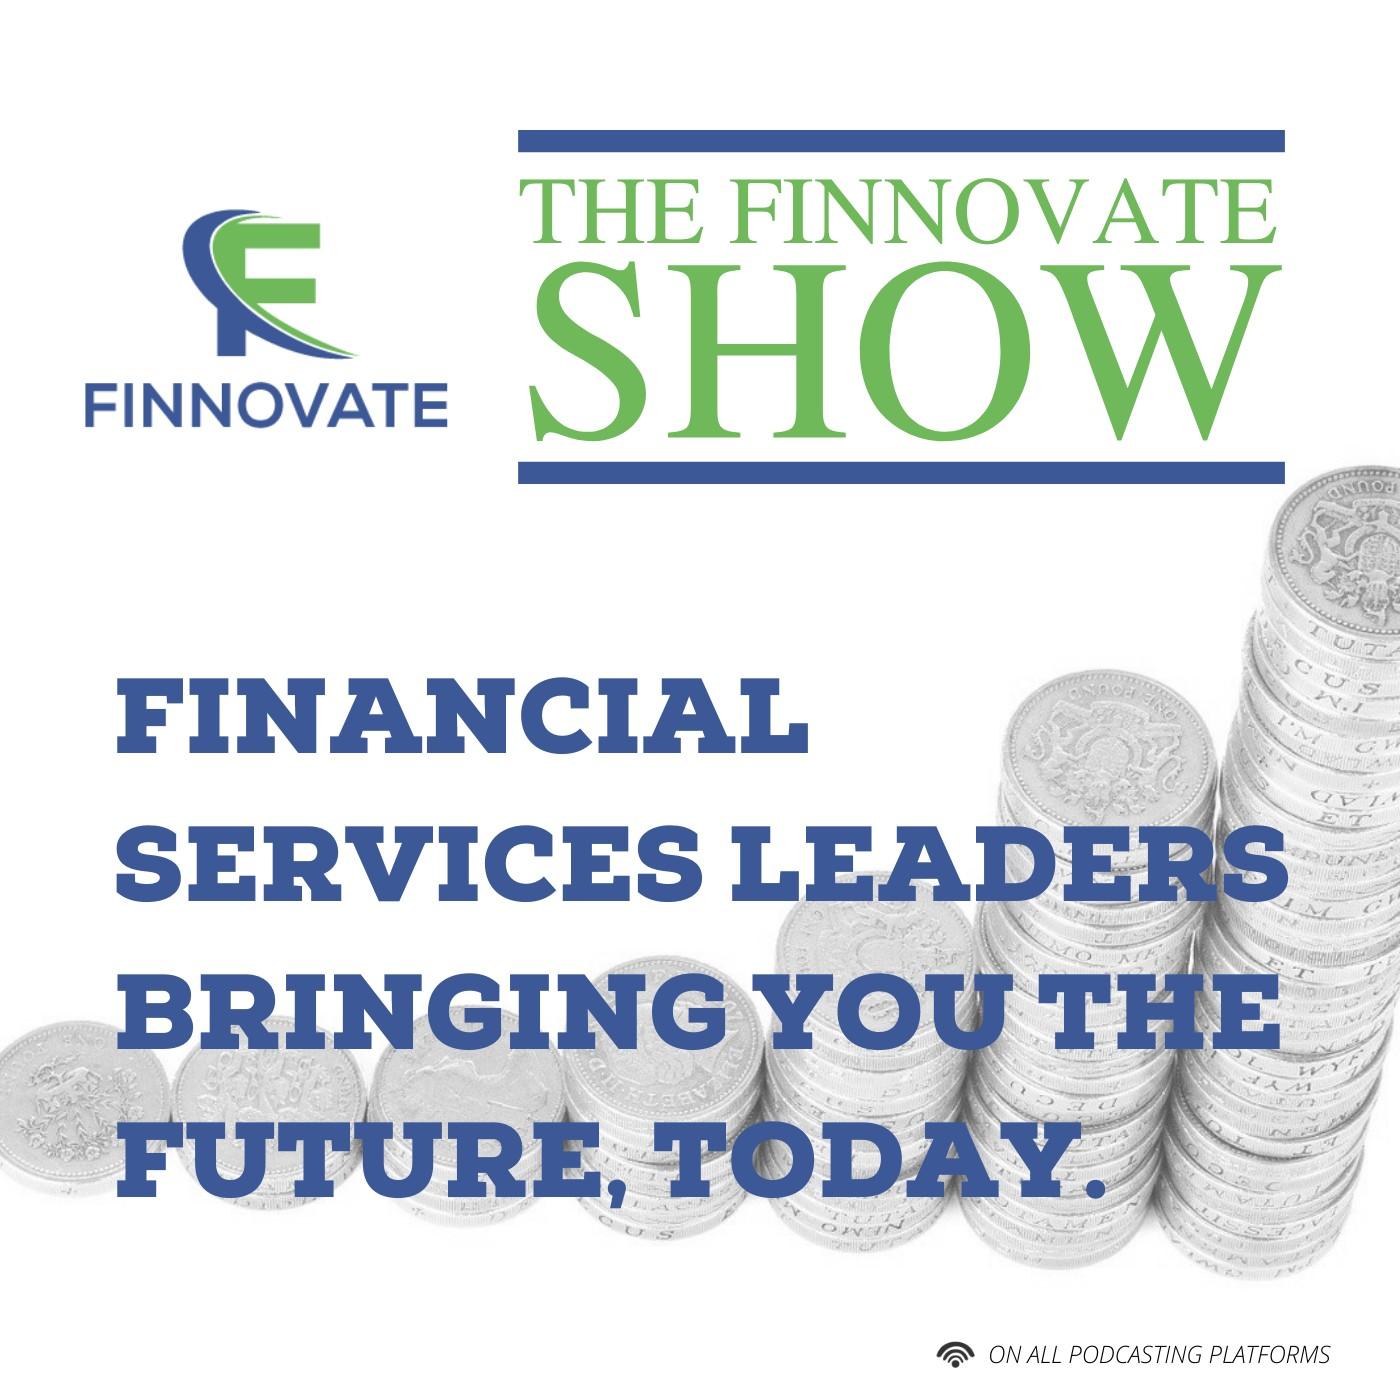 The Finnovate Show